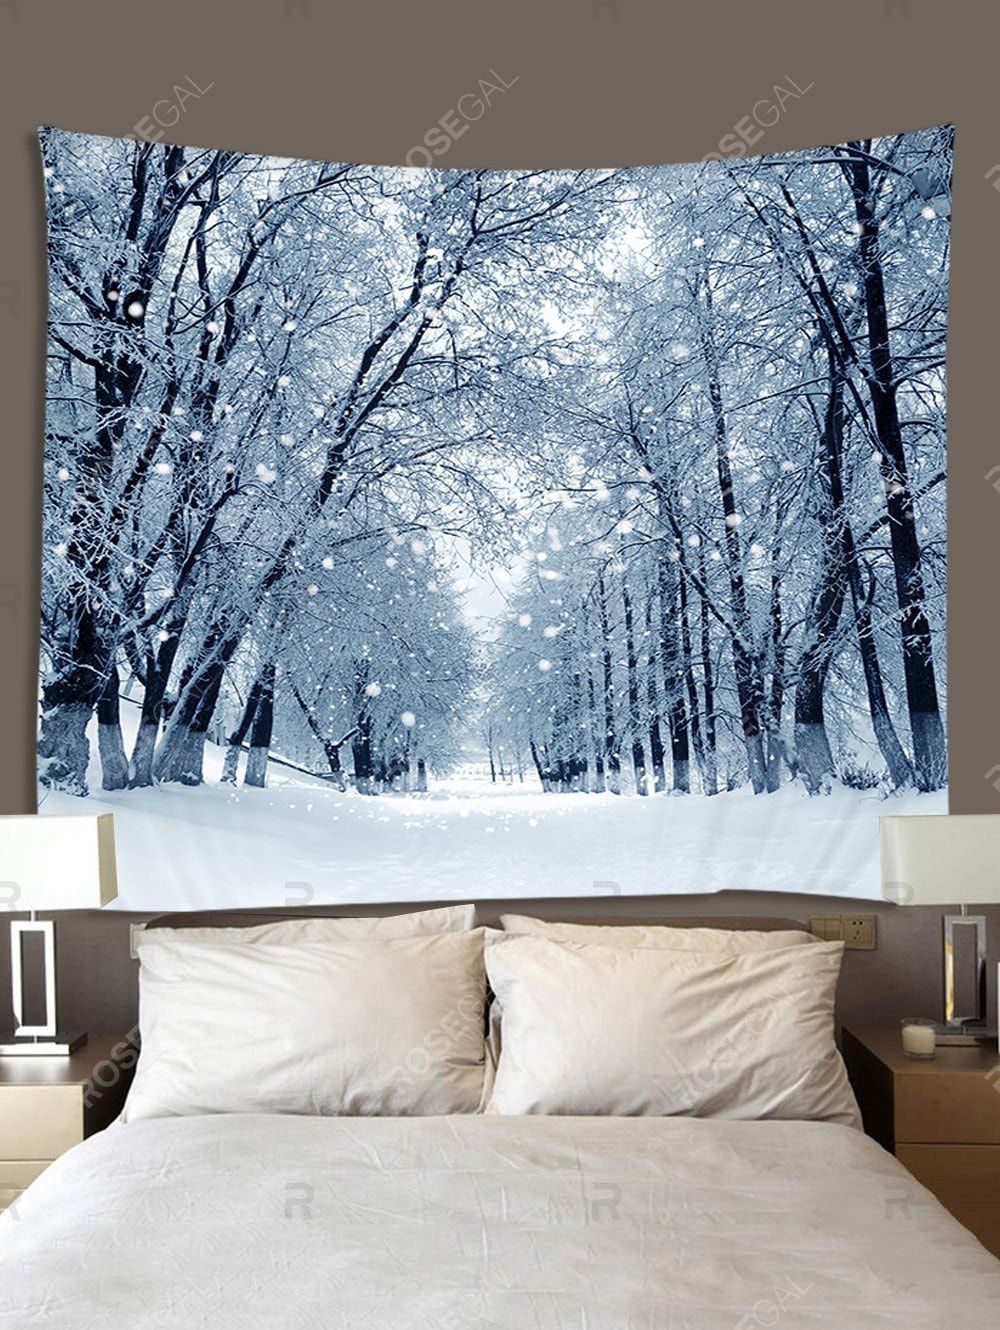 Snow Forest Road Print Tapestry Wall Hanging Art Decor Inside 2018 Snow Wall Art (View 3 of 20)